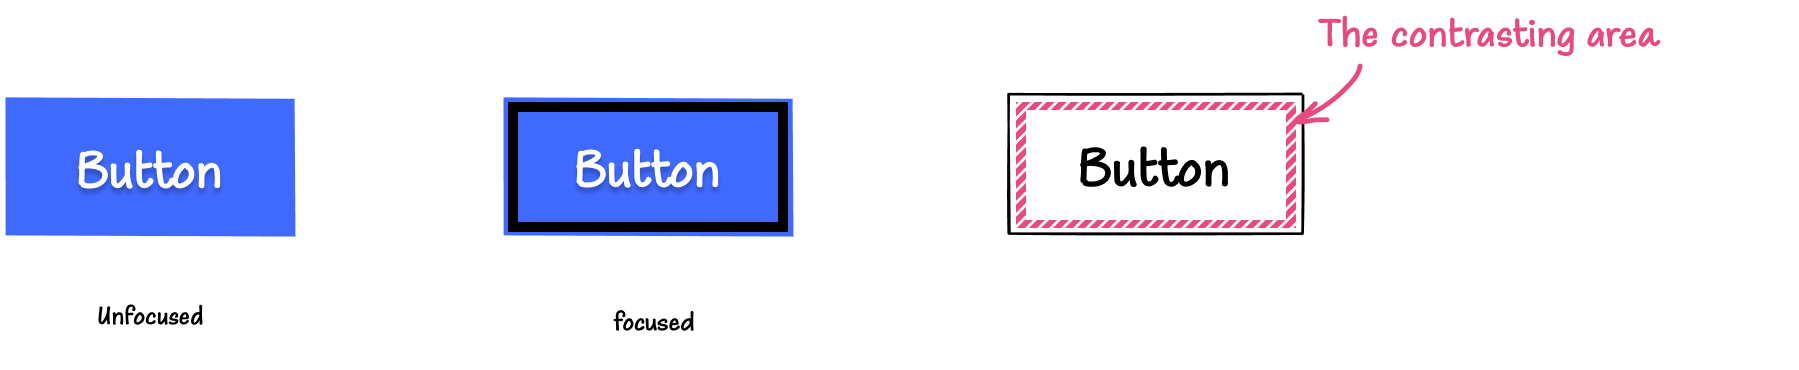 Illustration: On the left is a blue button with a white label in its default, unfocused state. In the middle is the blue button with an inner thick black outline. On the right, is a button with the same outline but with a pattern applied to it, indicating that this patterned area is the contrasting area.